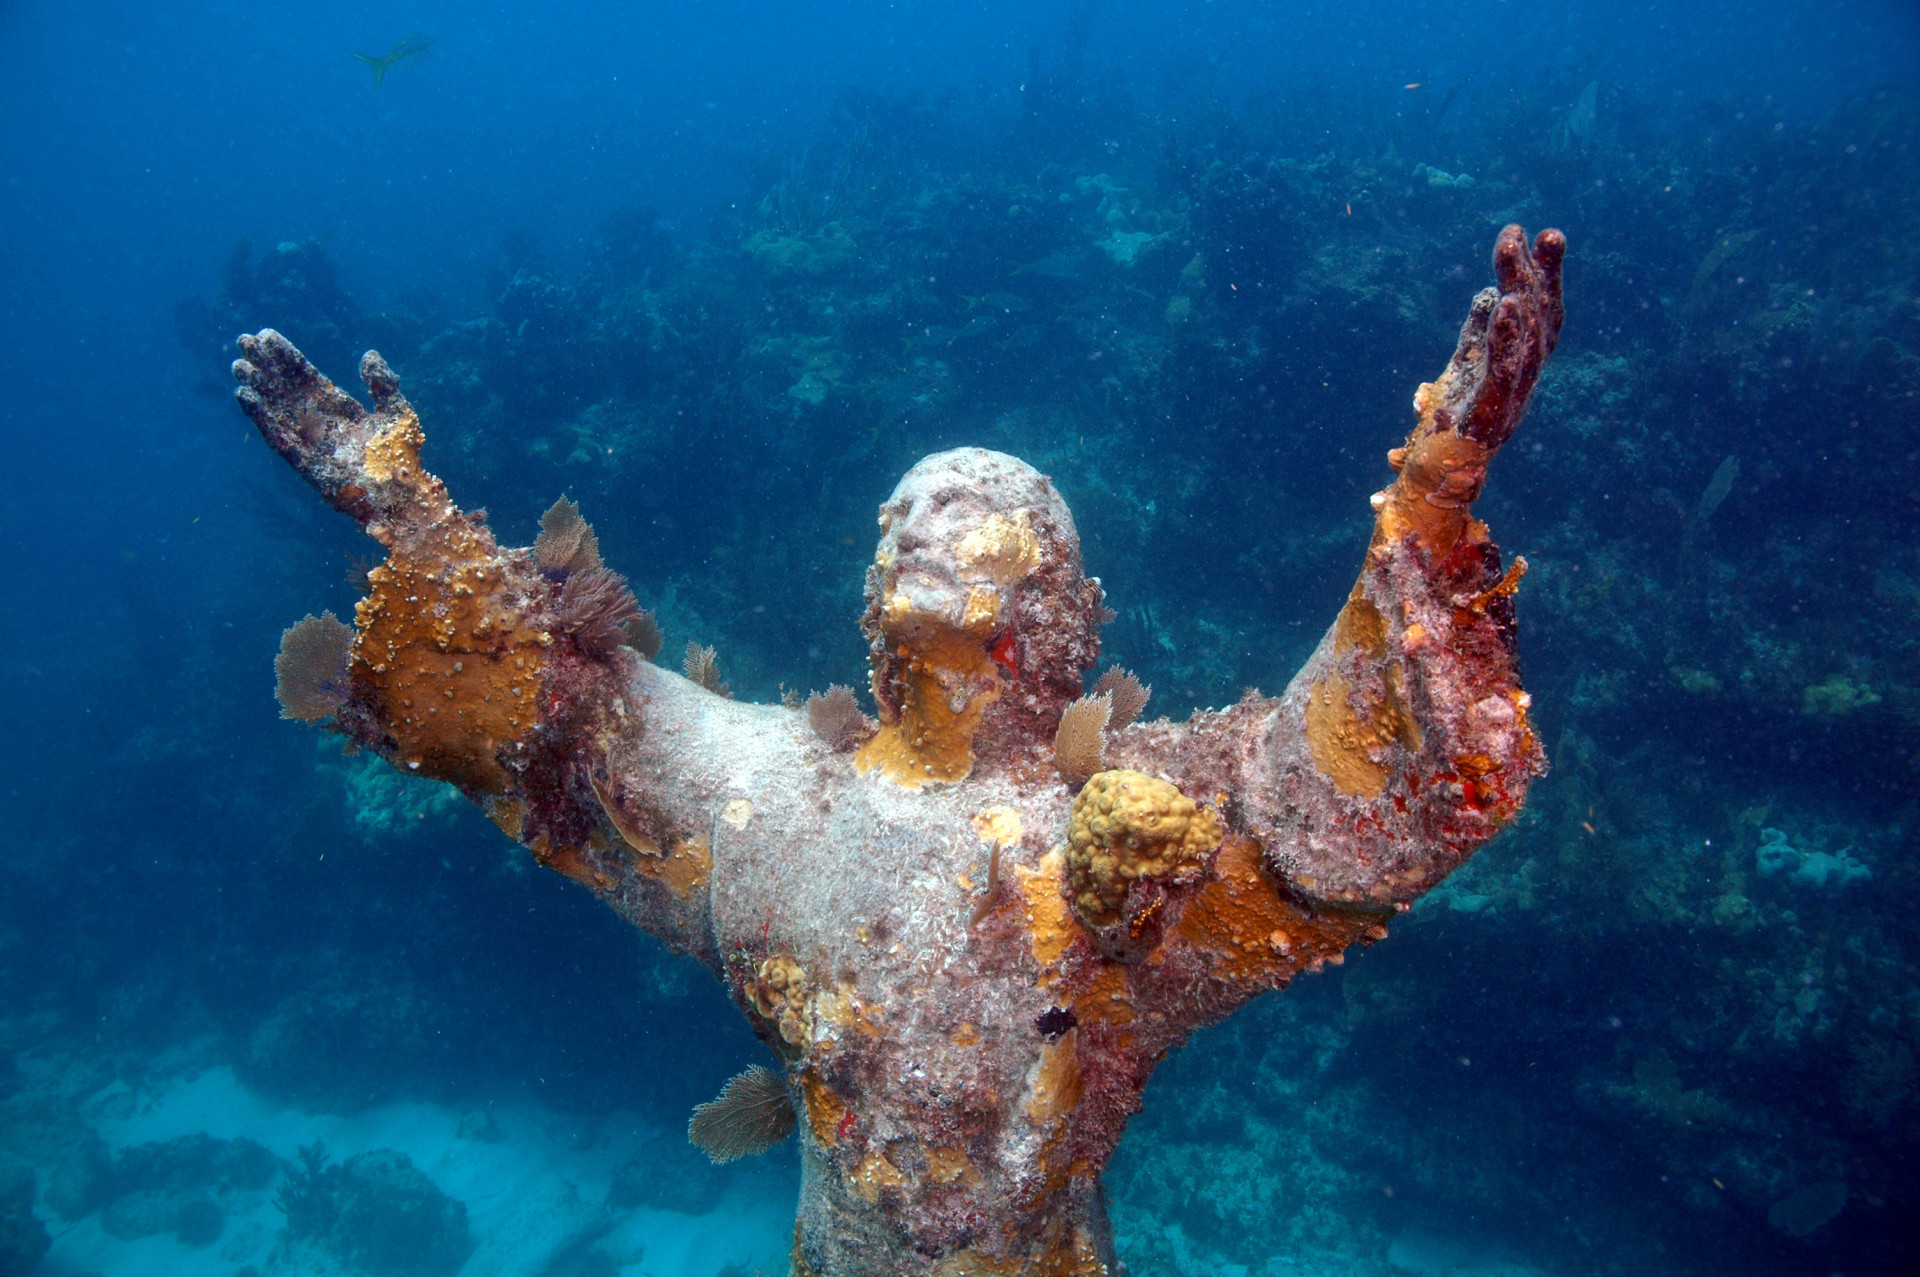 The original submerged bronze statue of Jesus Christ by Guido Galletti is housed in the Mediterranean Sea, off San Fruttuoso. But the statue’s family has grown since it was originally placed in 1954.<p><a href="https://www.msn.com/en-sg/community/channel/vid-7xx8mnucu55yw63we9va2gwr7uihbxwc68fxqp25x6tg4ftibpra?cvid=94631541bc0f4f89bfd59158d696ad7e">Follow us and access great exclusive content every day</a></p>